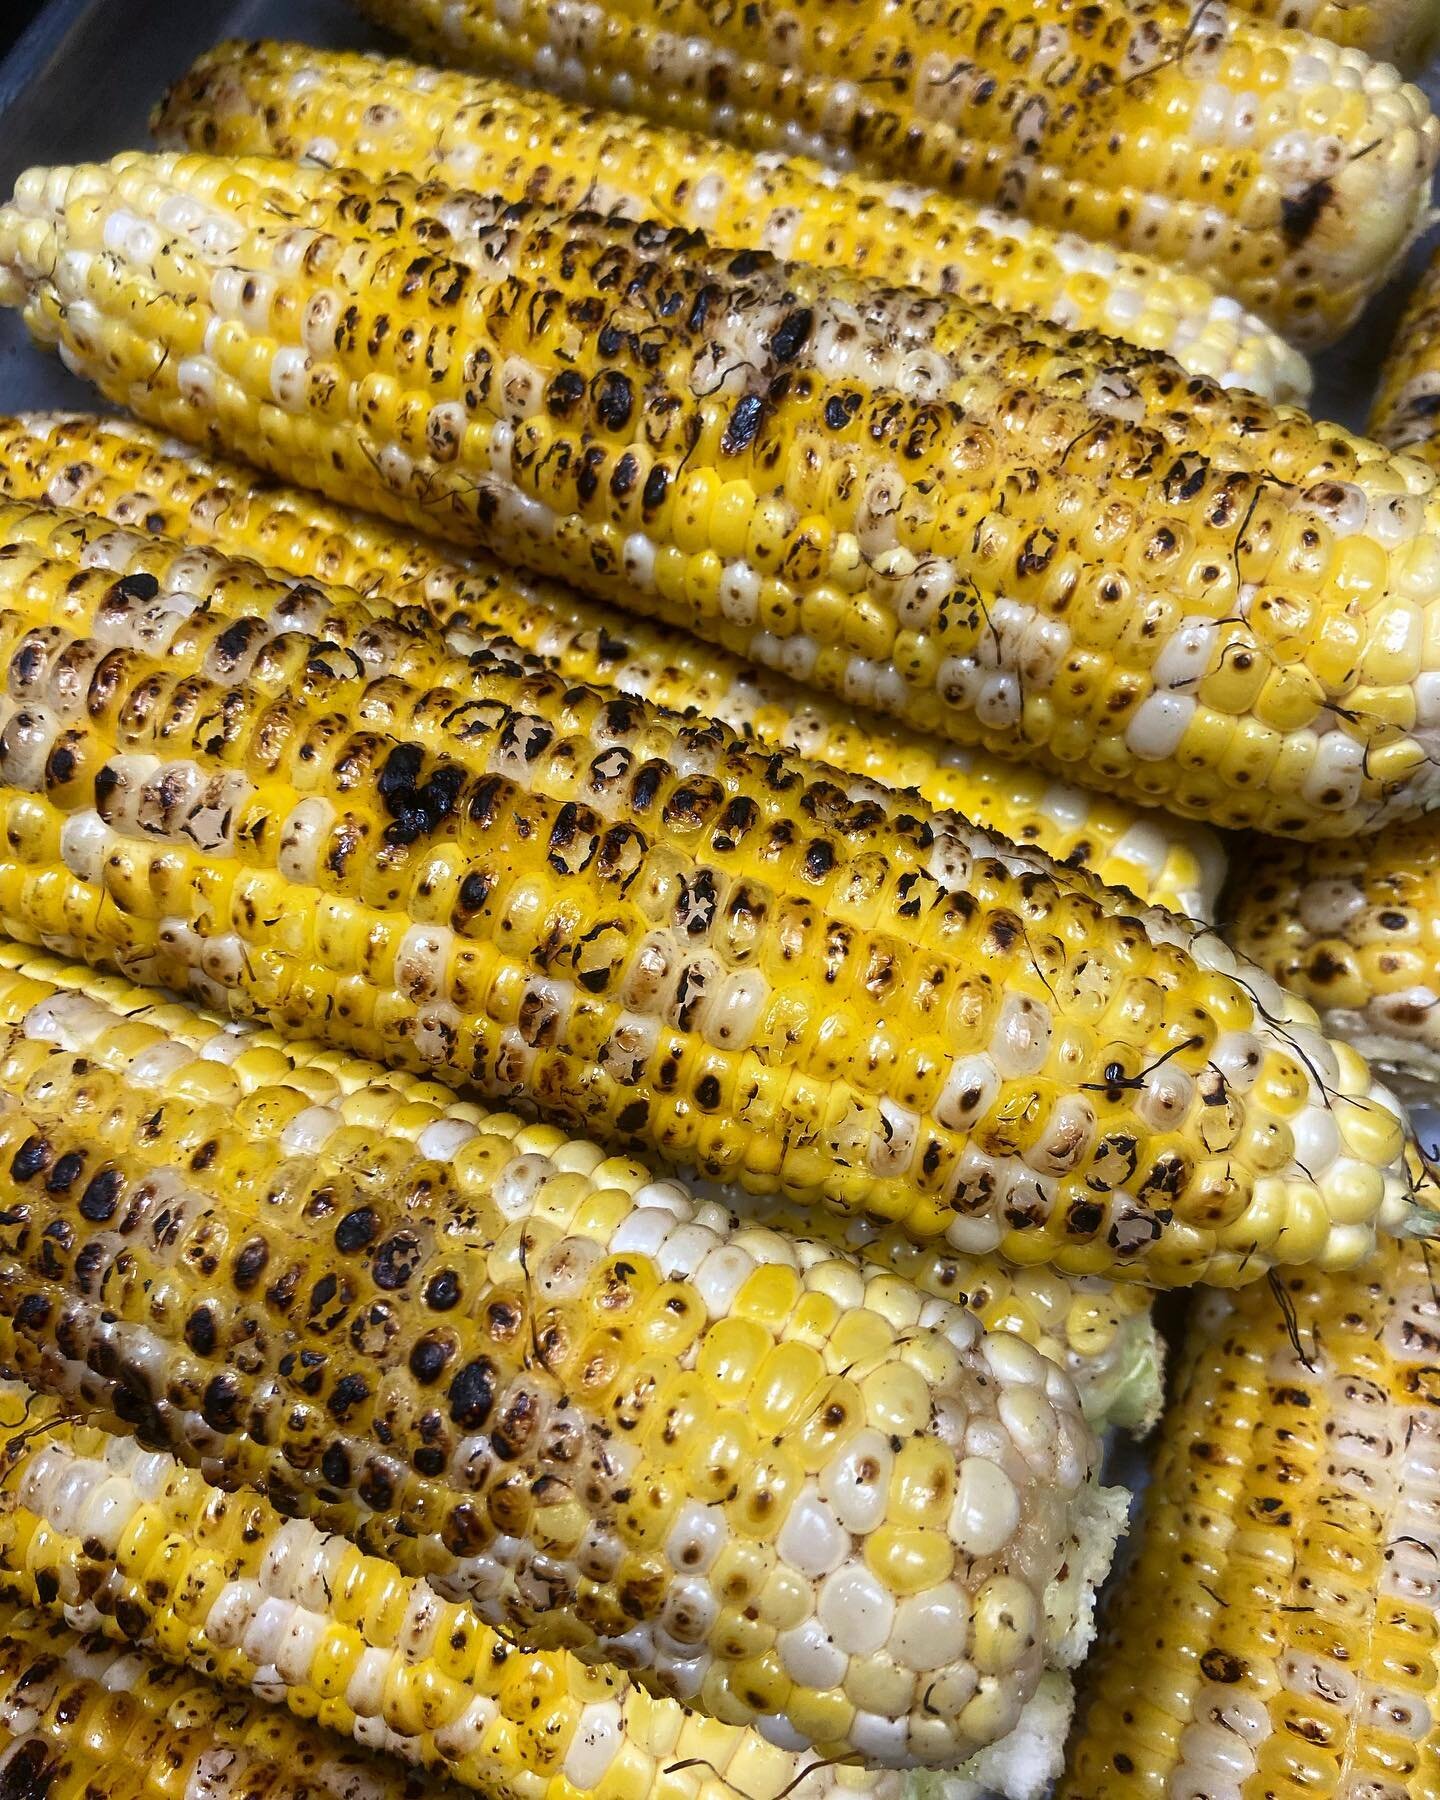 You&rsquo;ve been asking since last summer, it&rsquo;s that time again! Jersey corn is back on the menu! #summer #corn #jerseycorn #truesalvagecafe #cafe #bakery #chefsigne #eatlocalnj #smallbusiness #foodgram #yum #summervibes #localproduce #foodpic